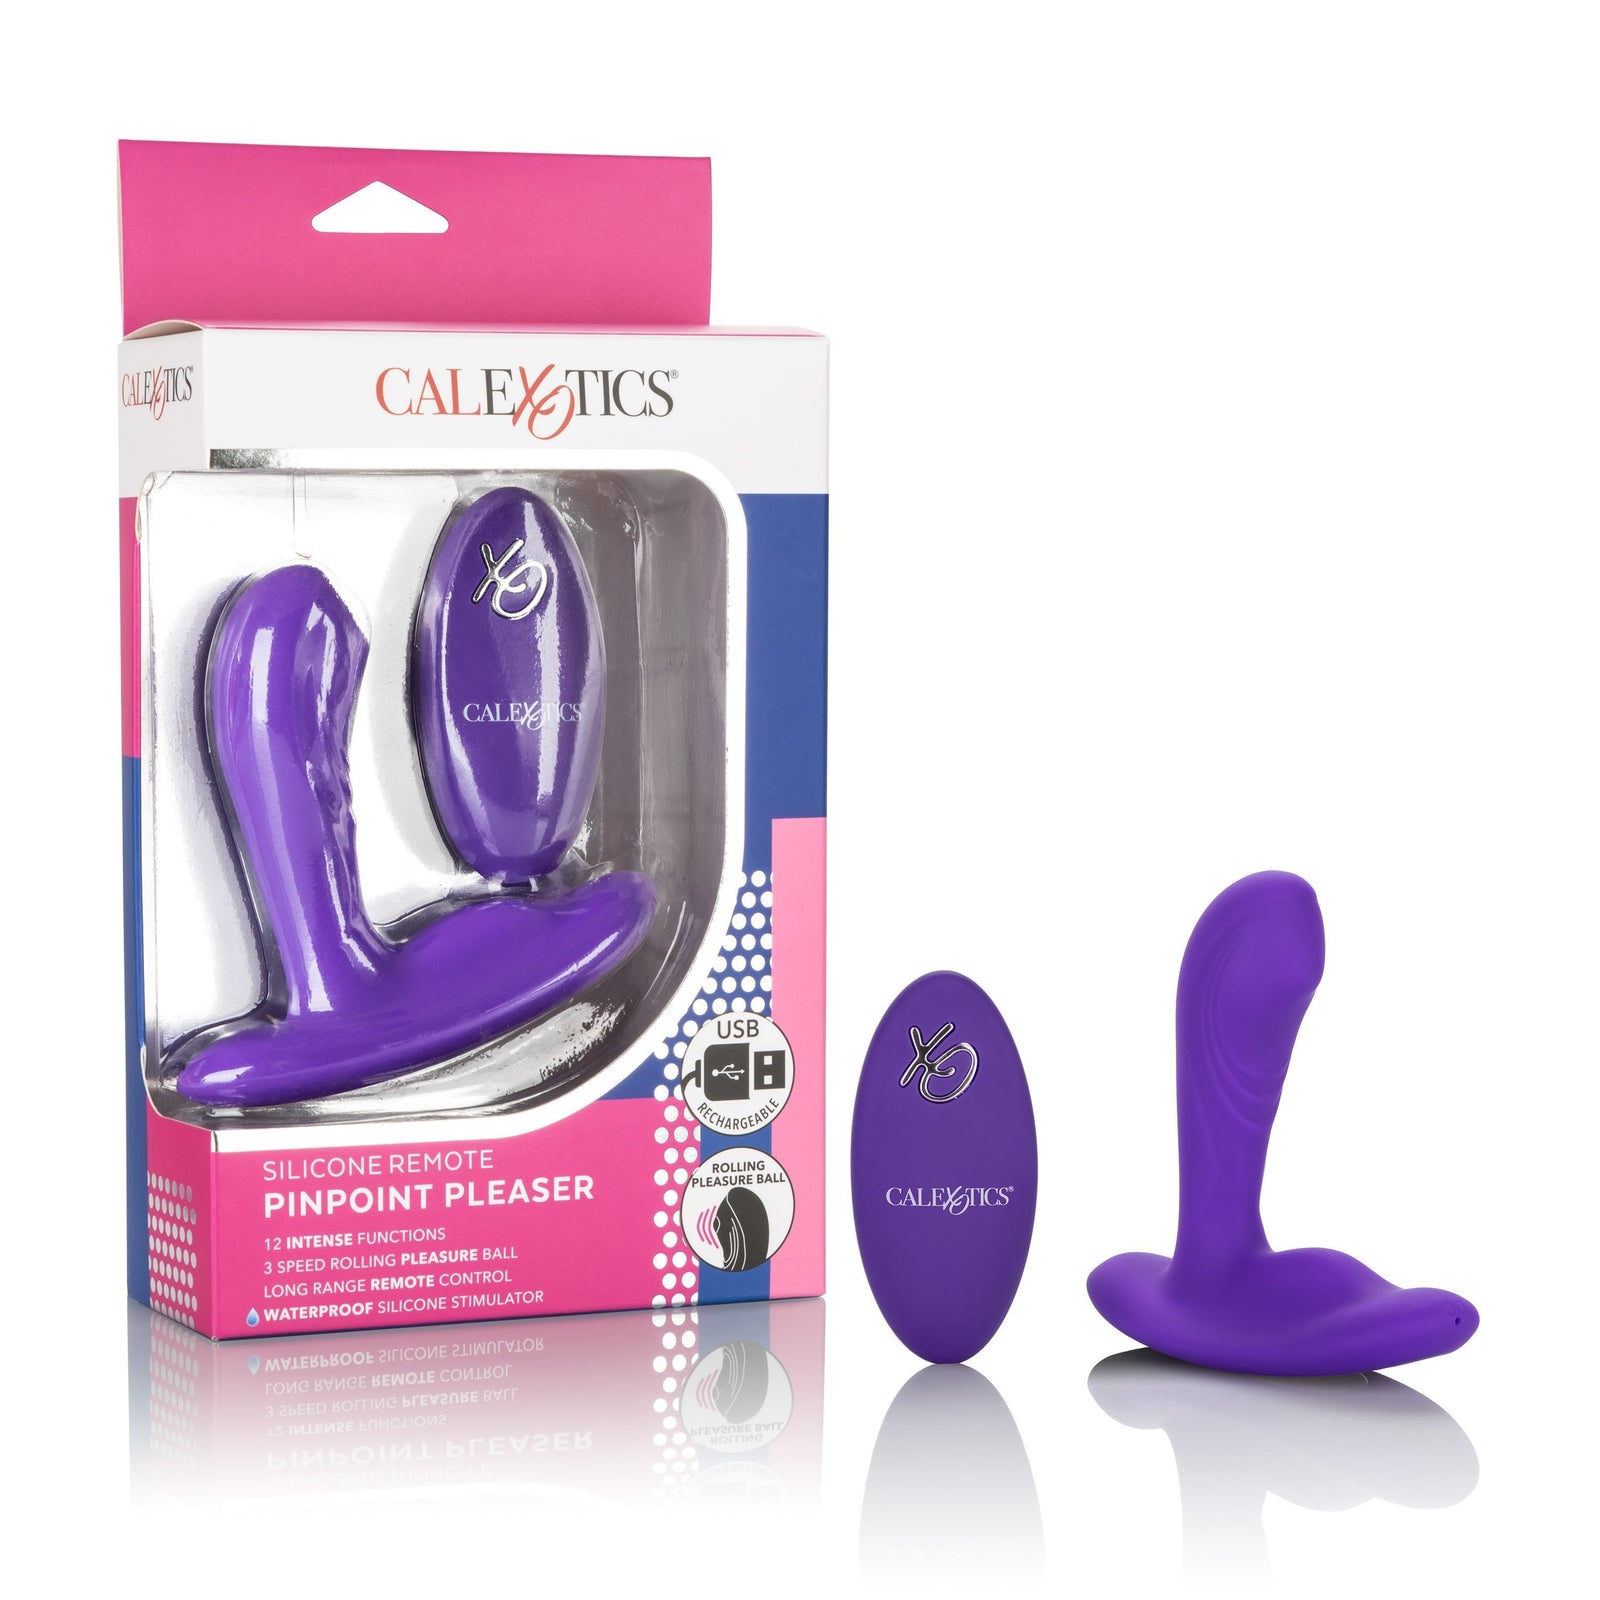 California Exotics - Silicone Remote Pinpoint Pleaser Prostate Massager (Purple) Prostate Massager (Vibration) Rechargeable Durio Asia